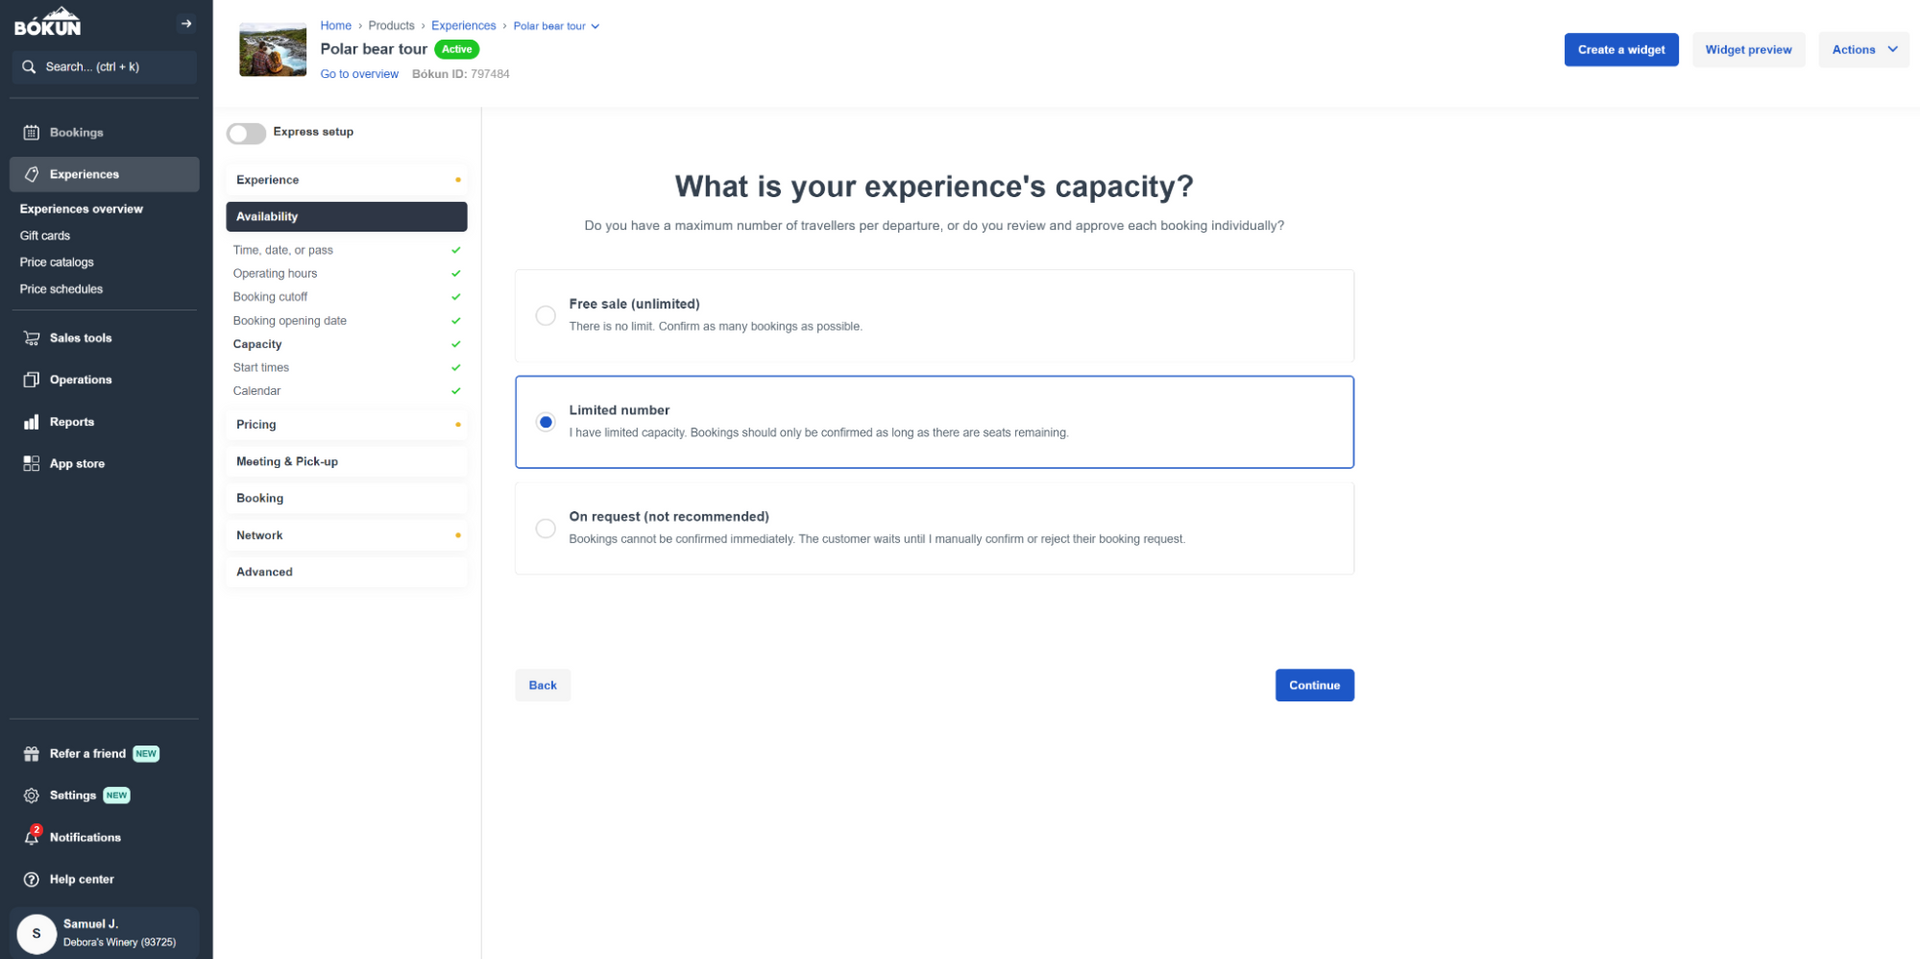 What is your experience's capacity? (Free sale/unlimited, Limited number, On request)